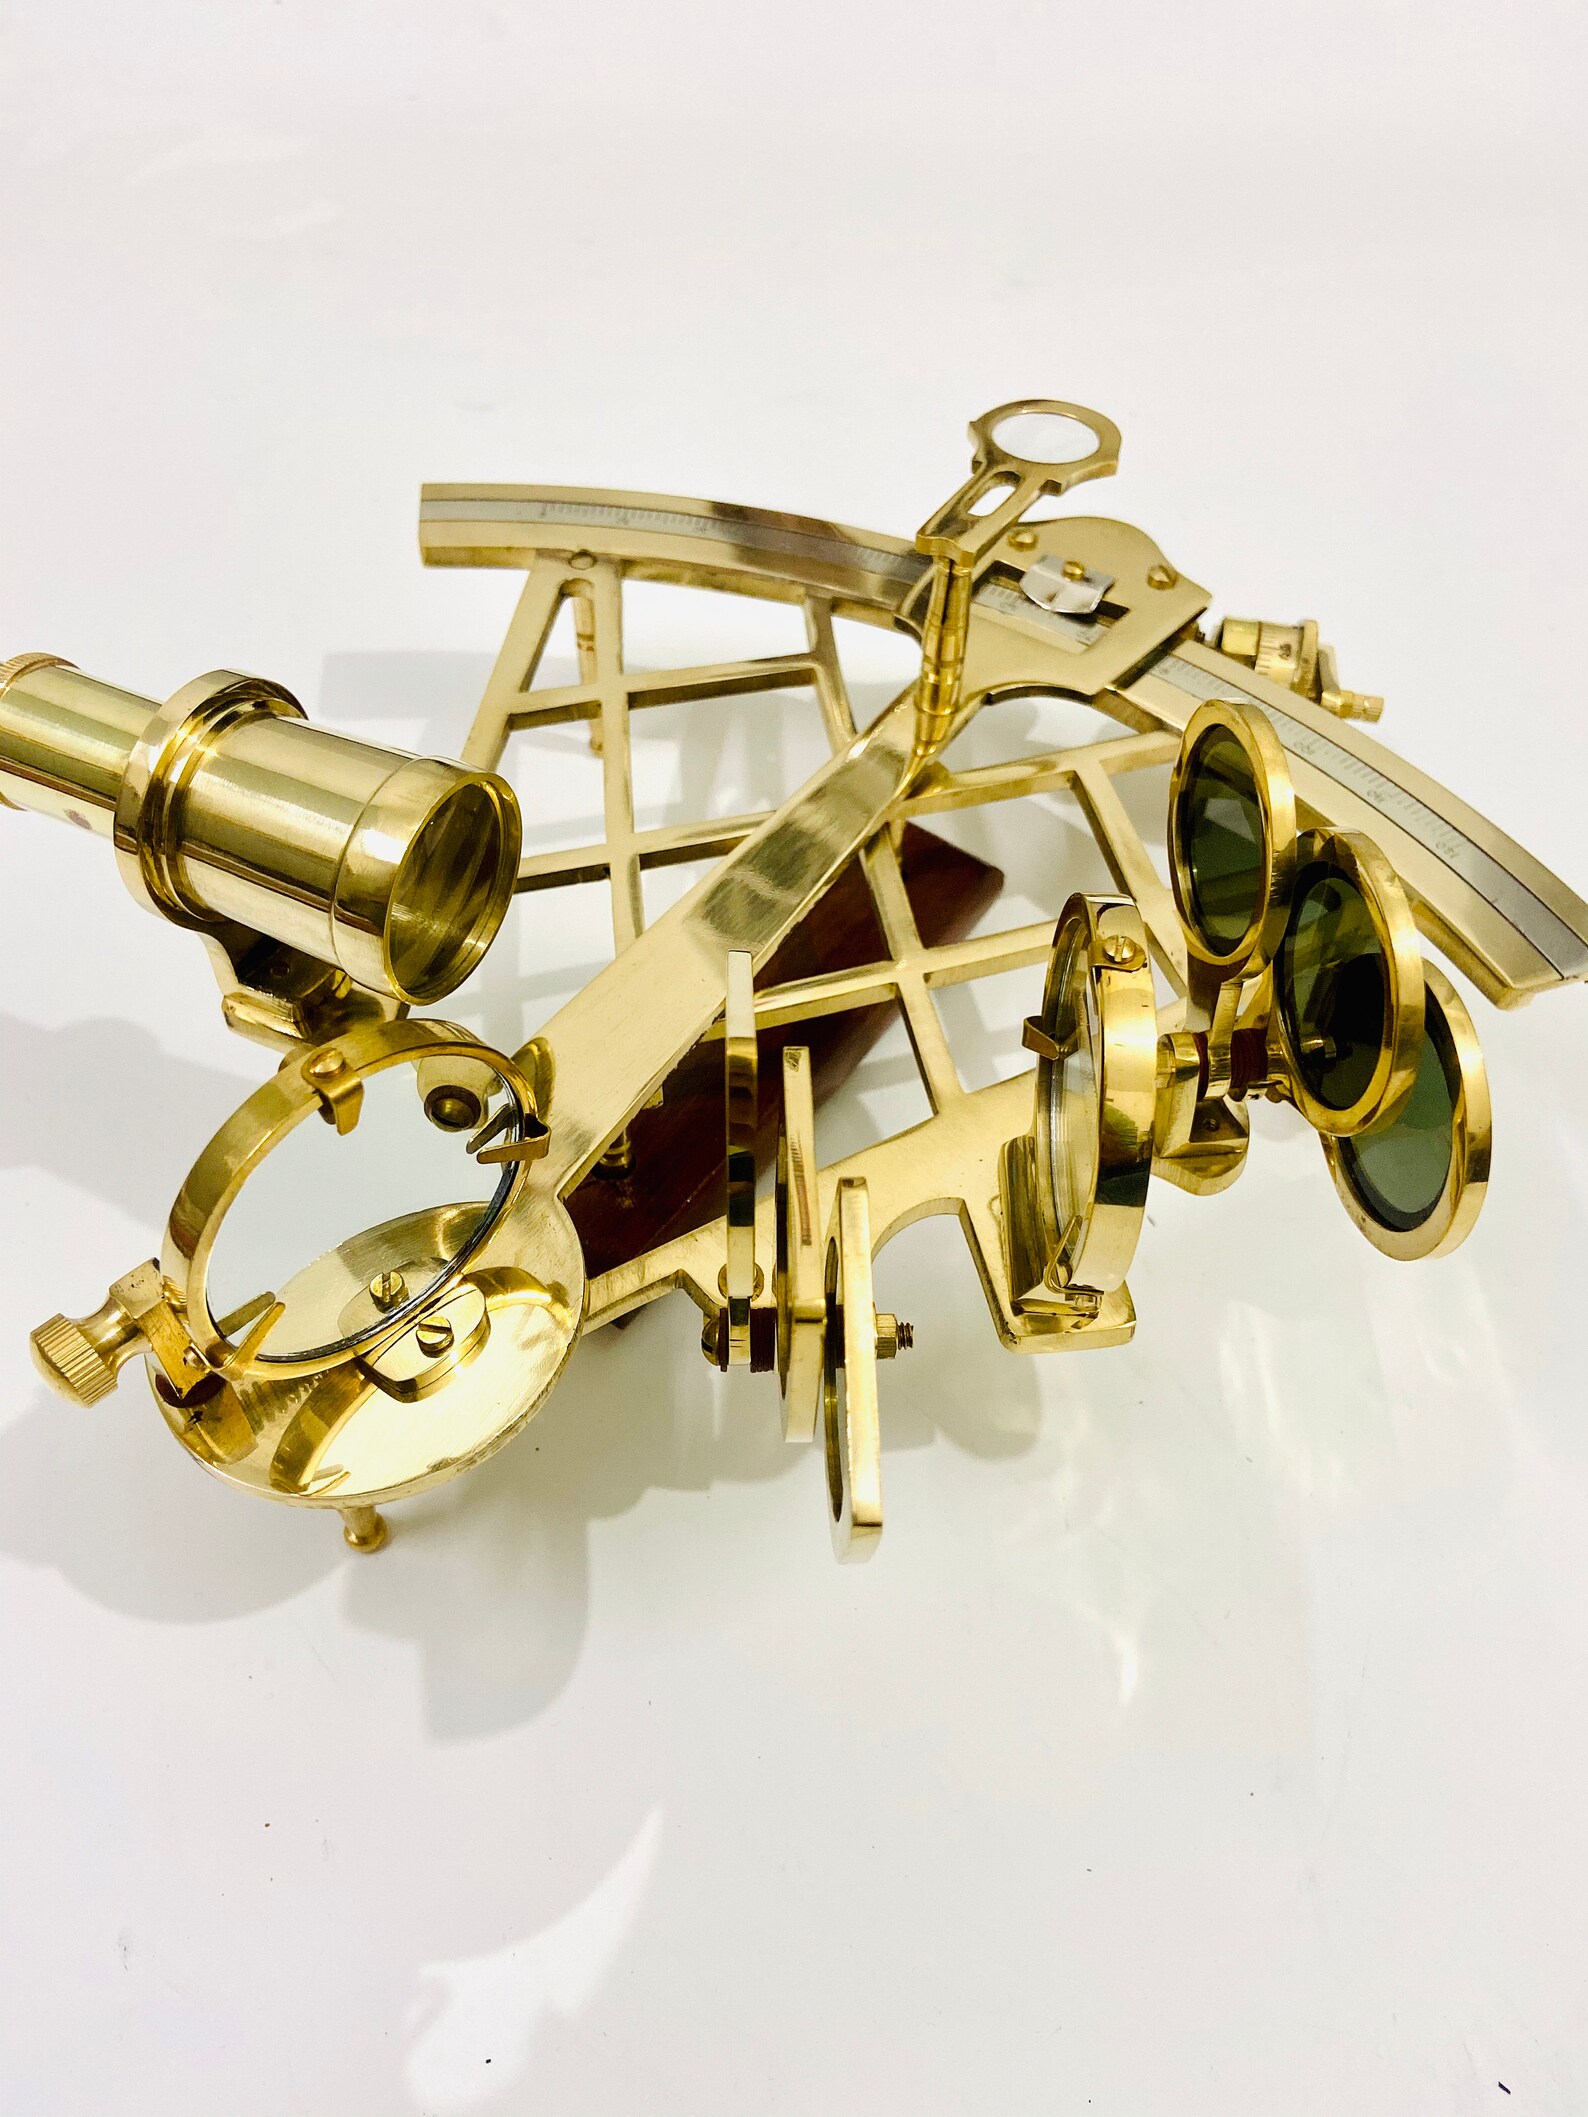 Nautical Brass 11 Sextant Real Sextant Working Sextant Sextant Navigational Marine Ship